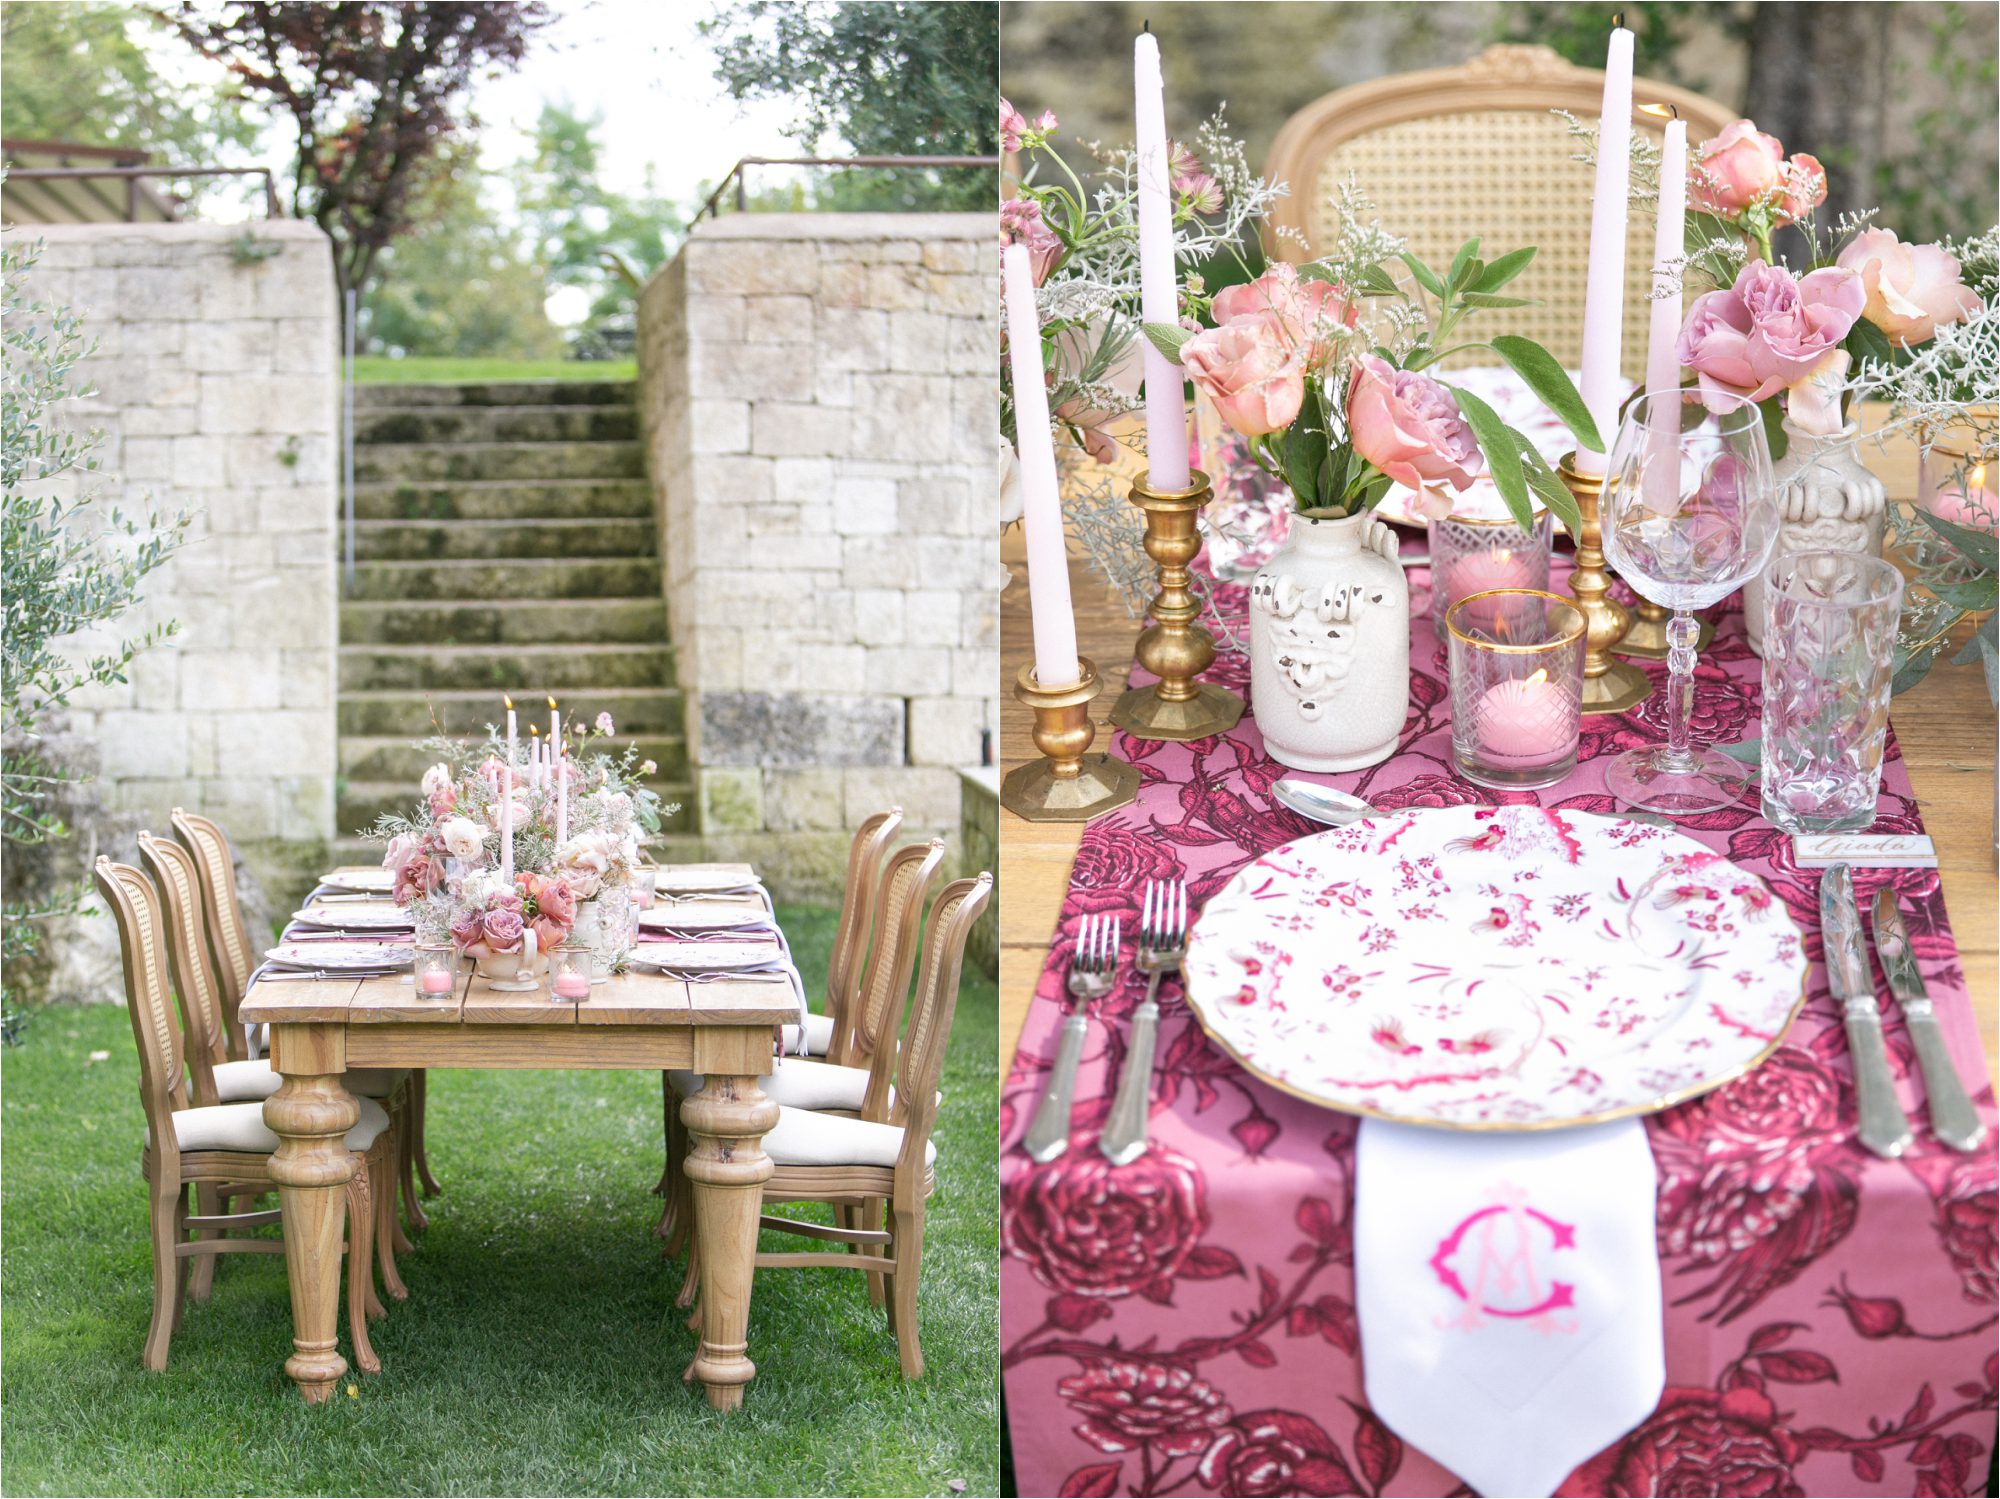 Ideas for an intimate wedding in Tuscany